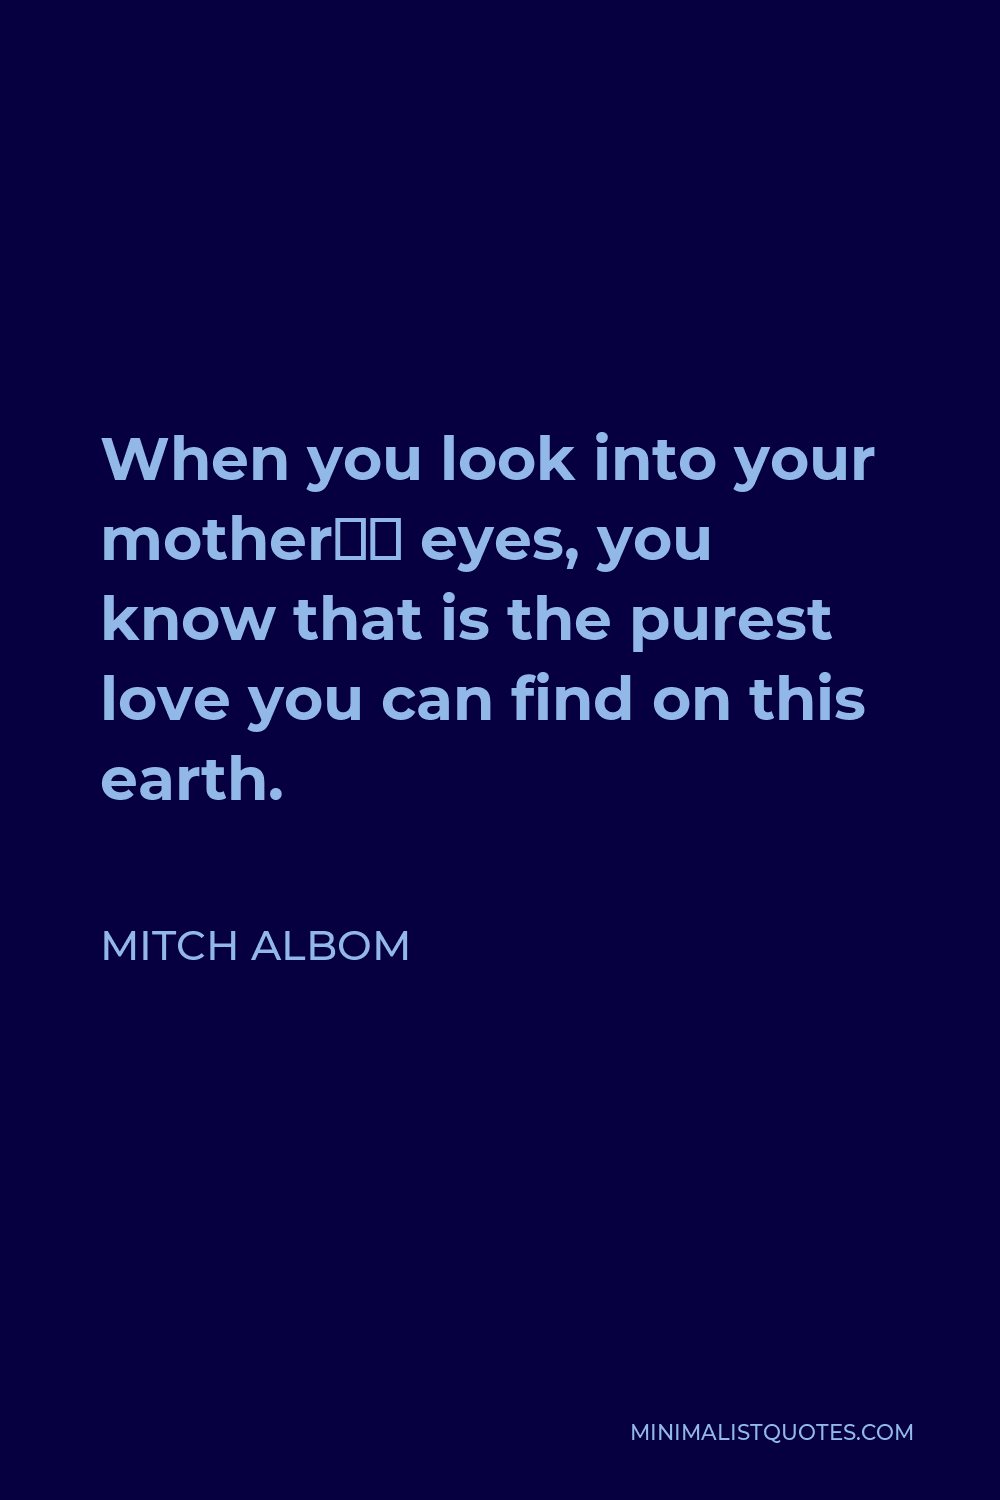 Mitch Albom Quote - When you look into your mother’s eyes, you know that is the purest love you can find on this earth.